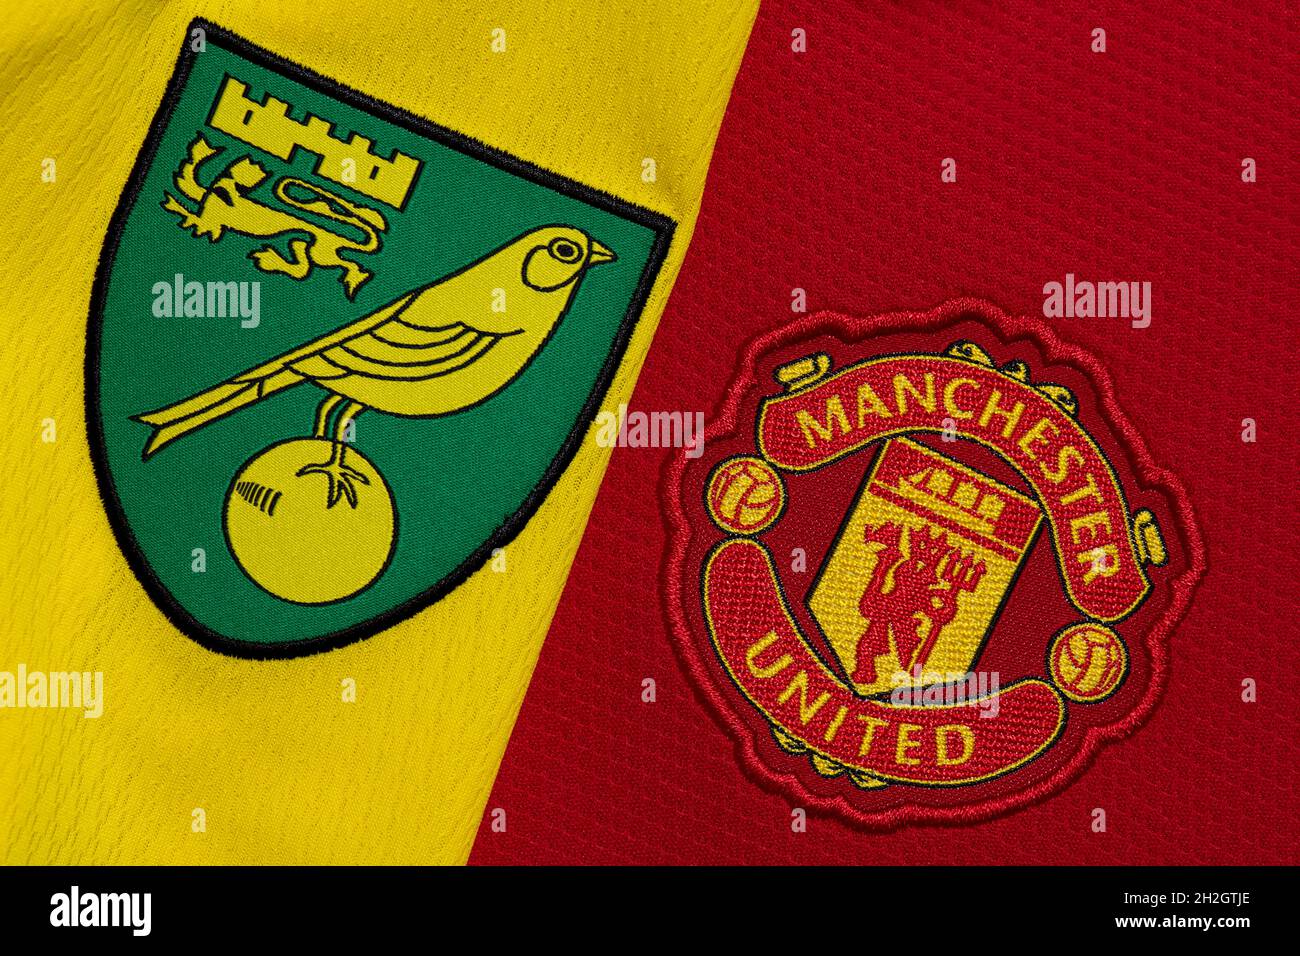 Close up of Man United and Norwich City club crest. Stock Photo